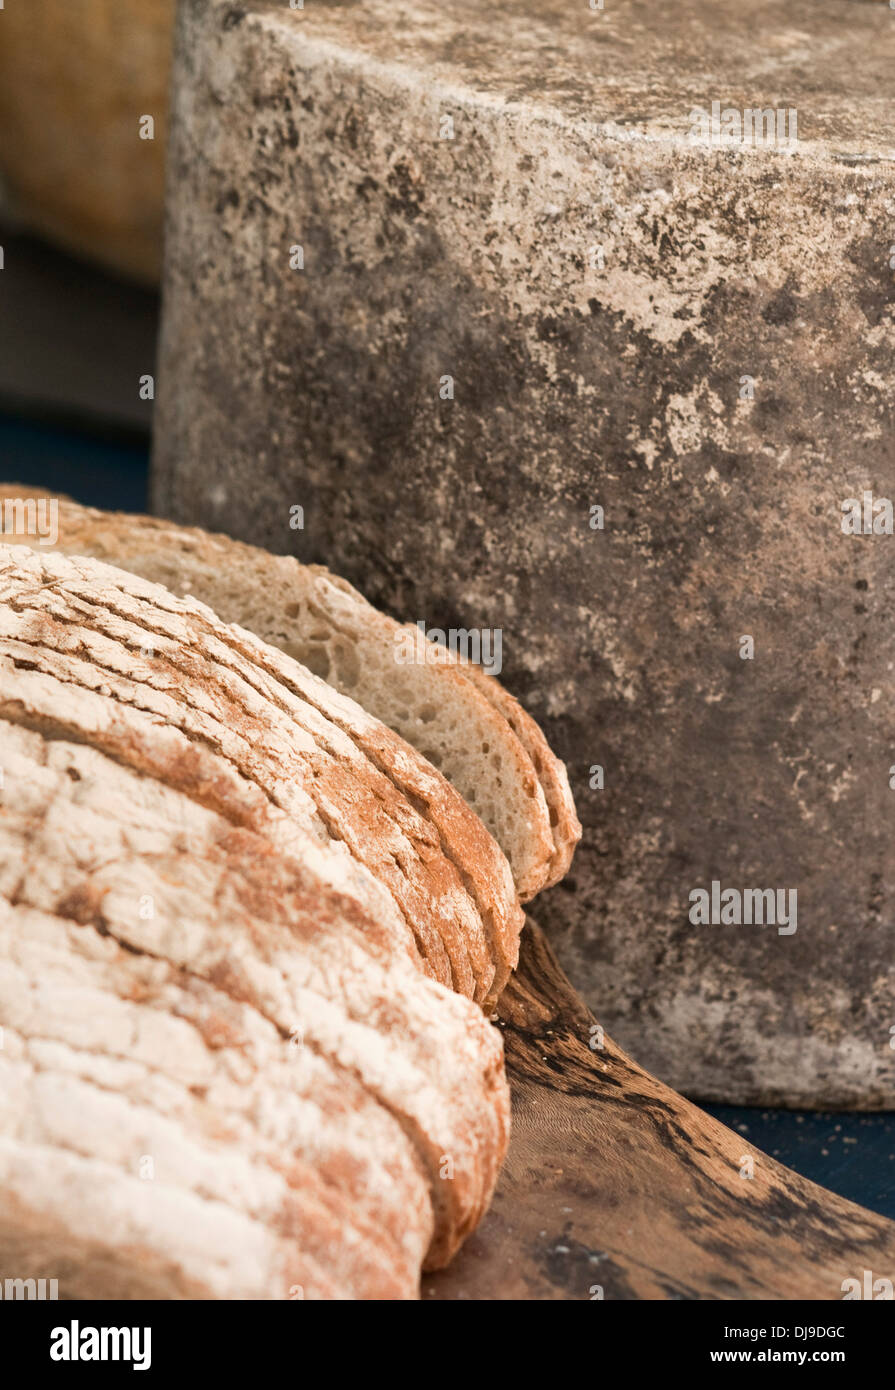 Detail view of artisan Cheddar cheese, and sour dough bread. Used for making toasted cheese sandwiches. Stock Photo